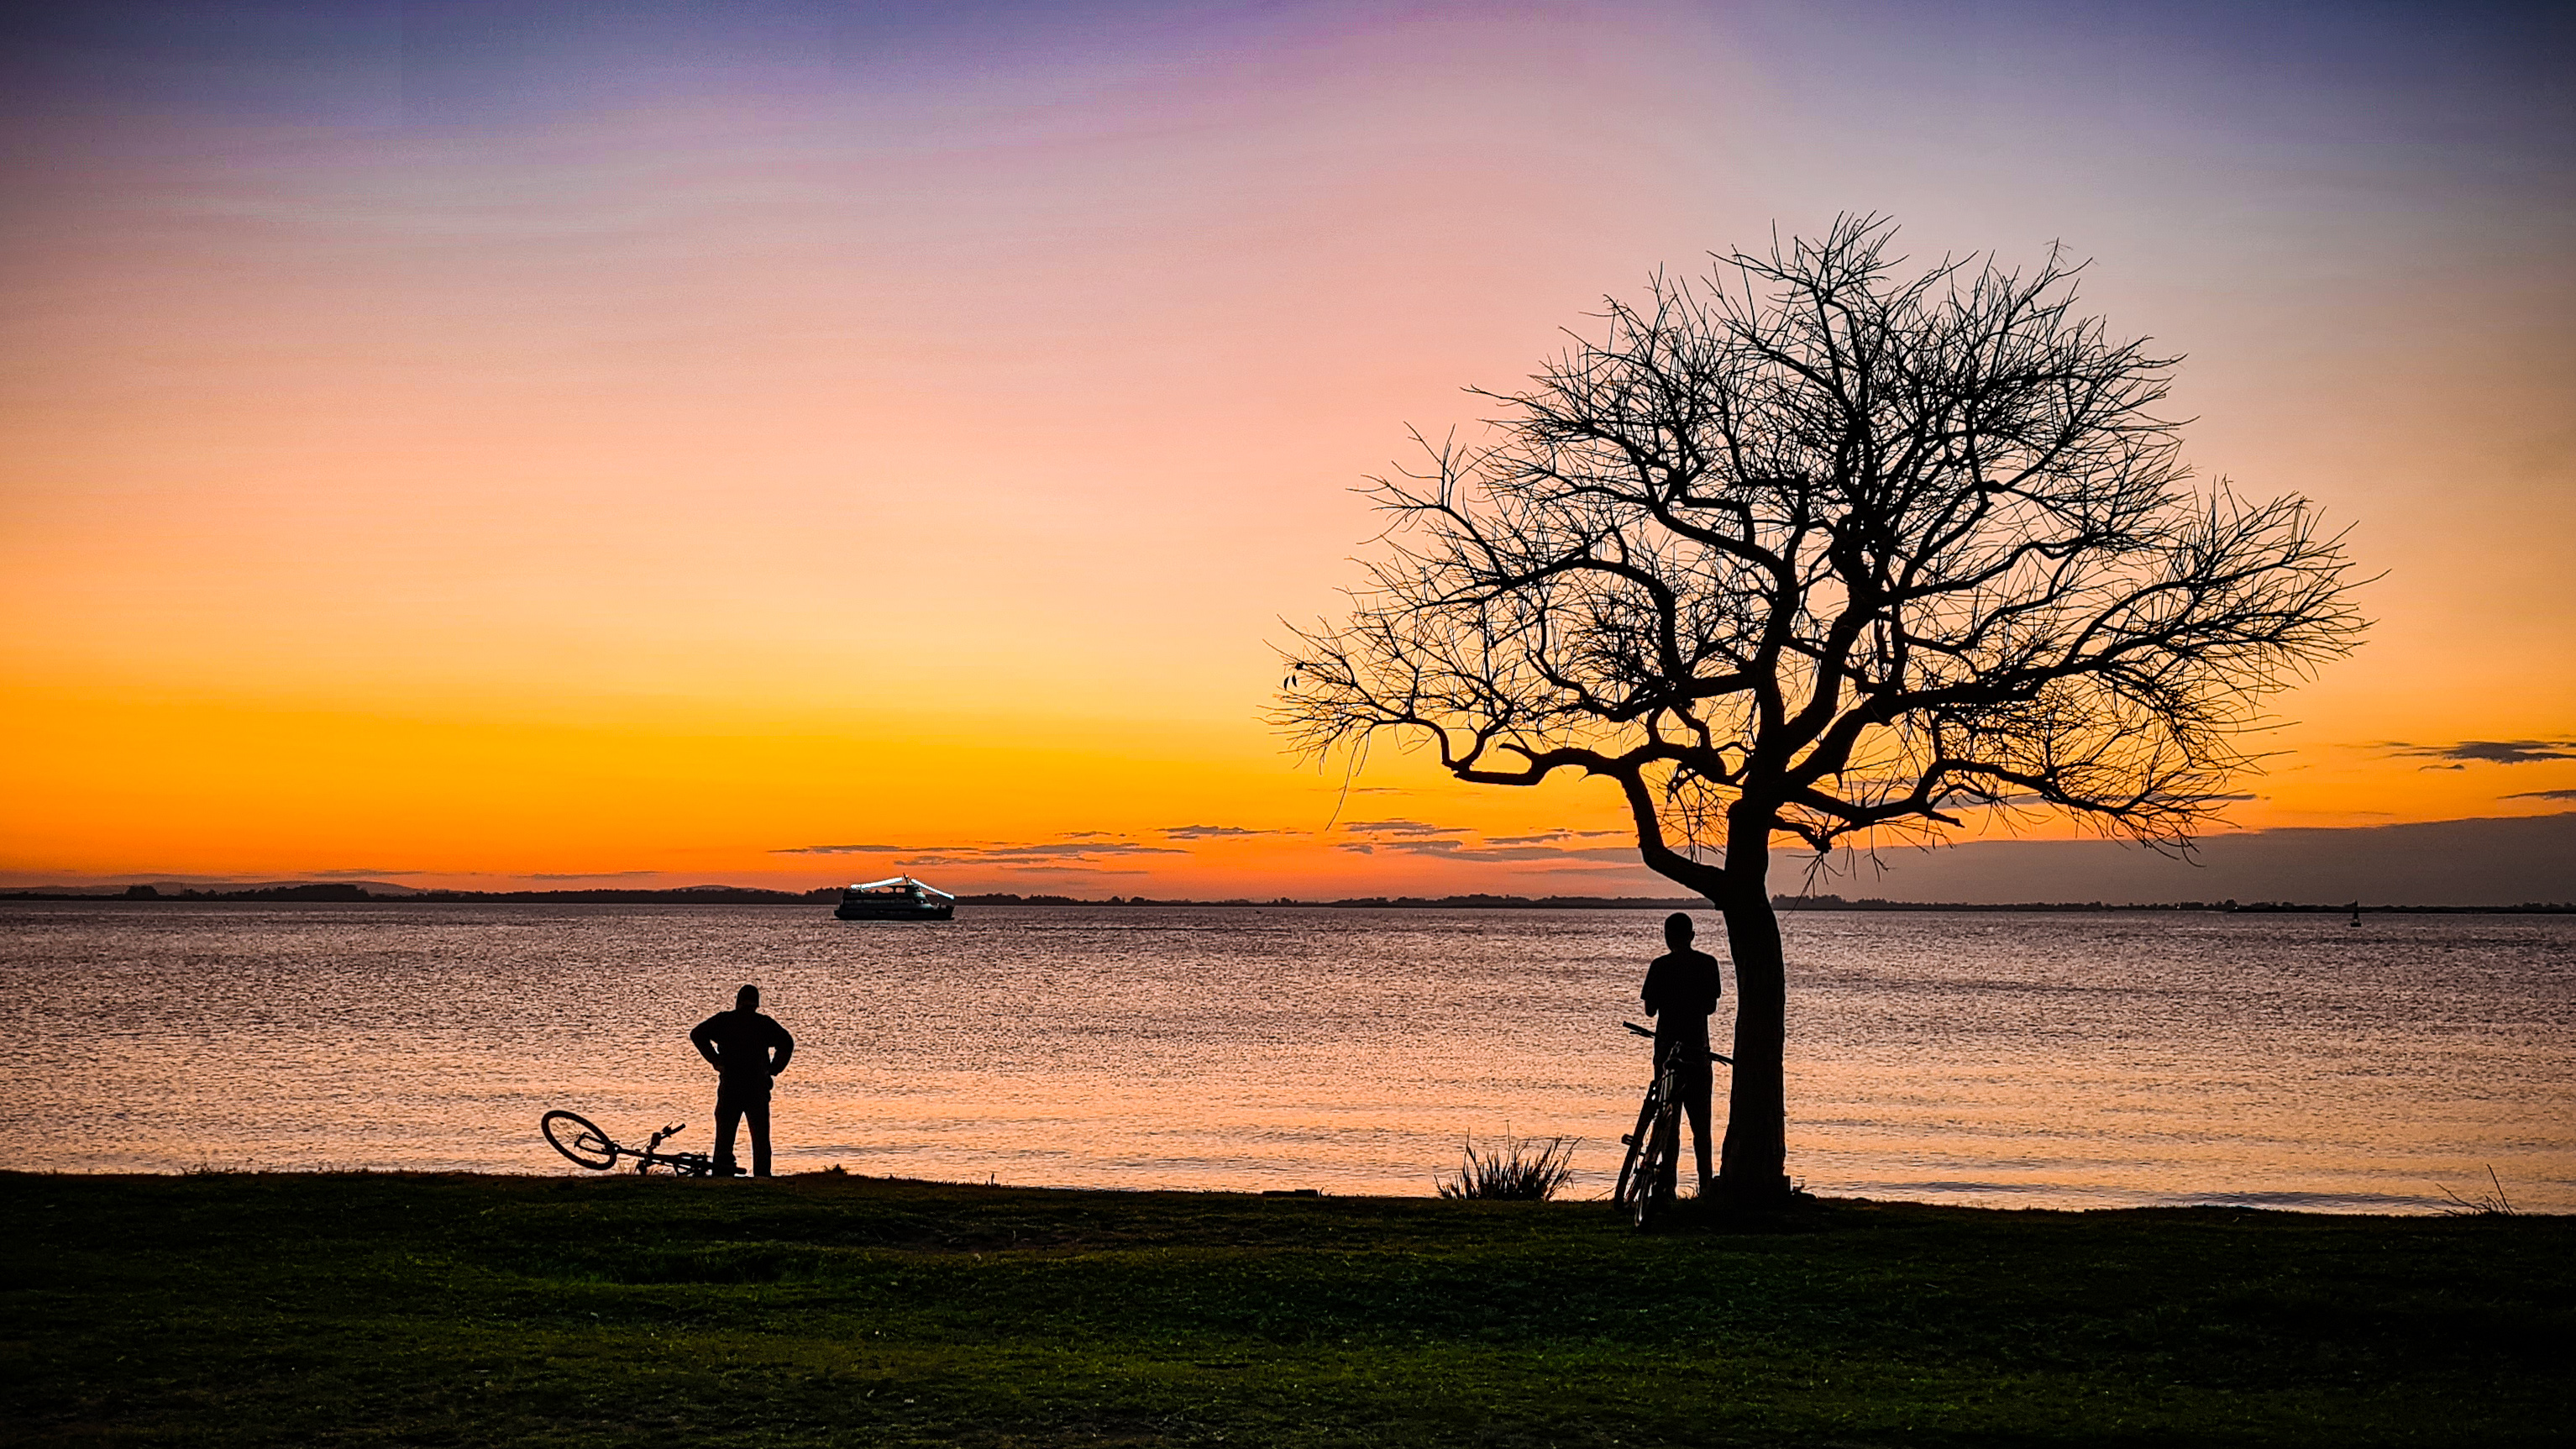 sunset with silhouette of two man and a tree at river bank